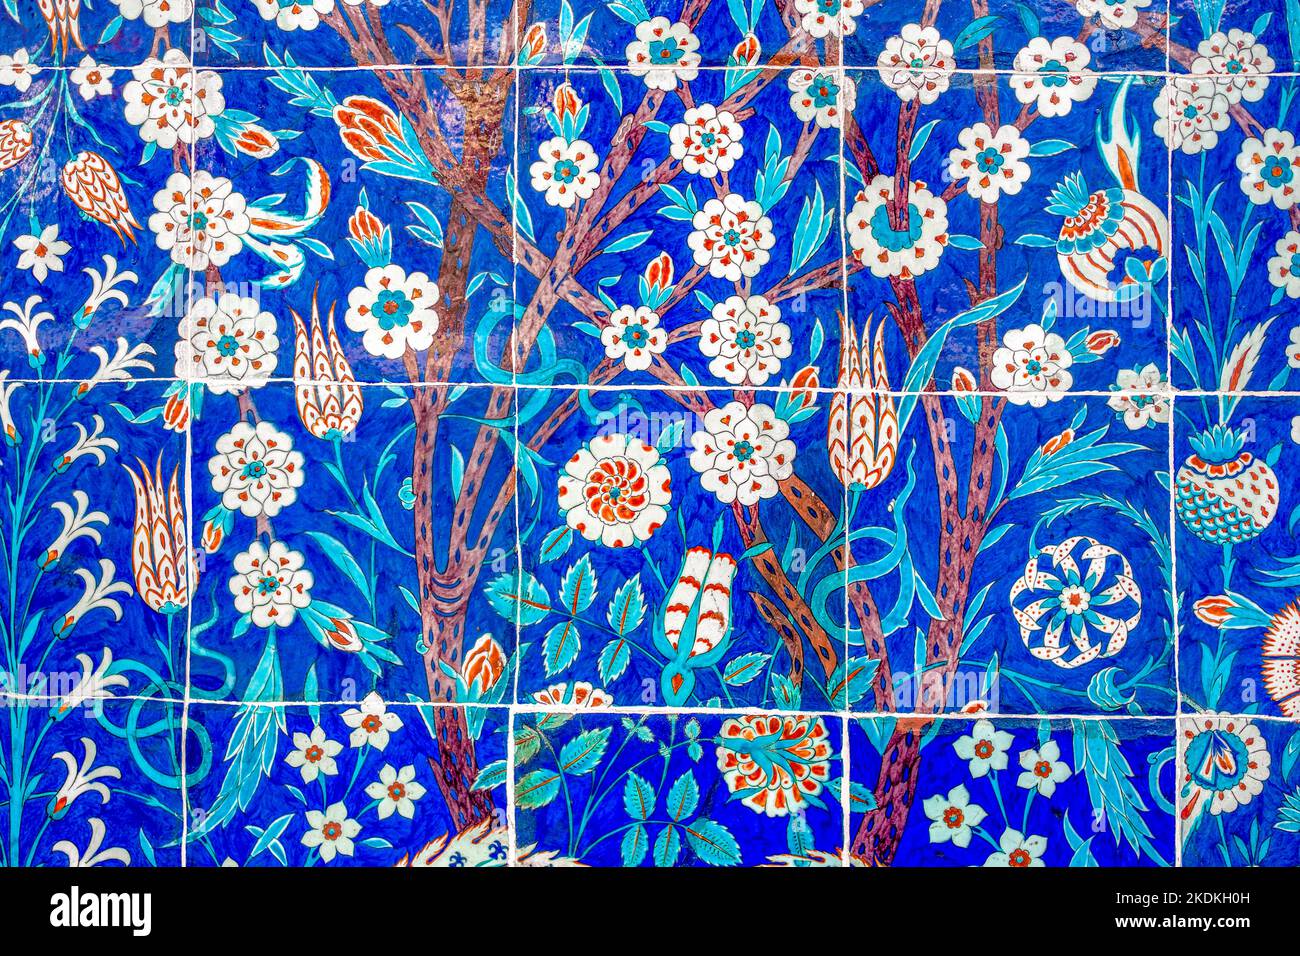 Blue background floral tiles on the Mosque wall. Stock Photo